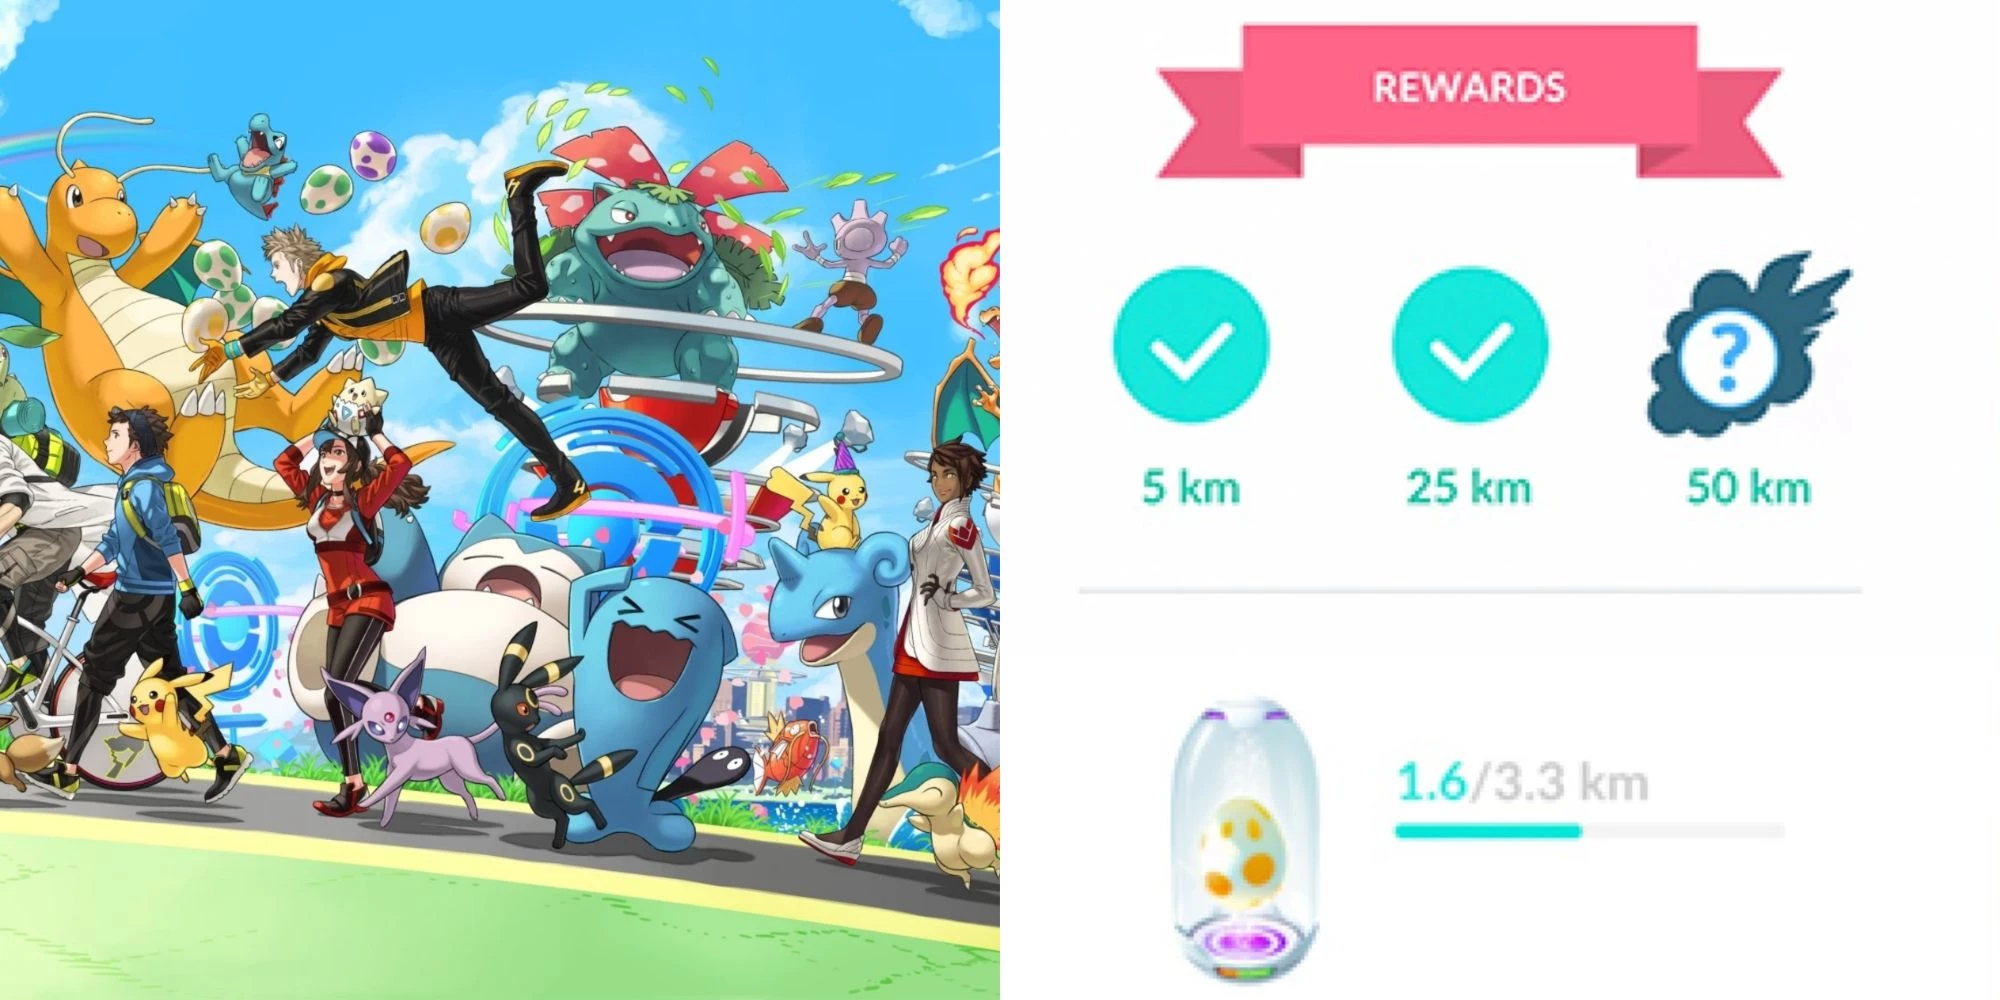 How To Turn On Adventure Sync in Pokemon GO